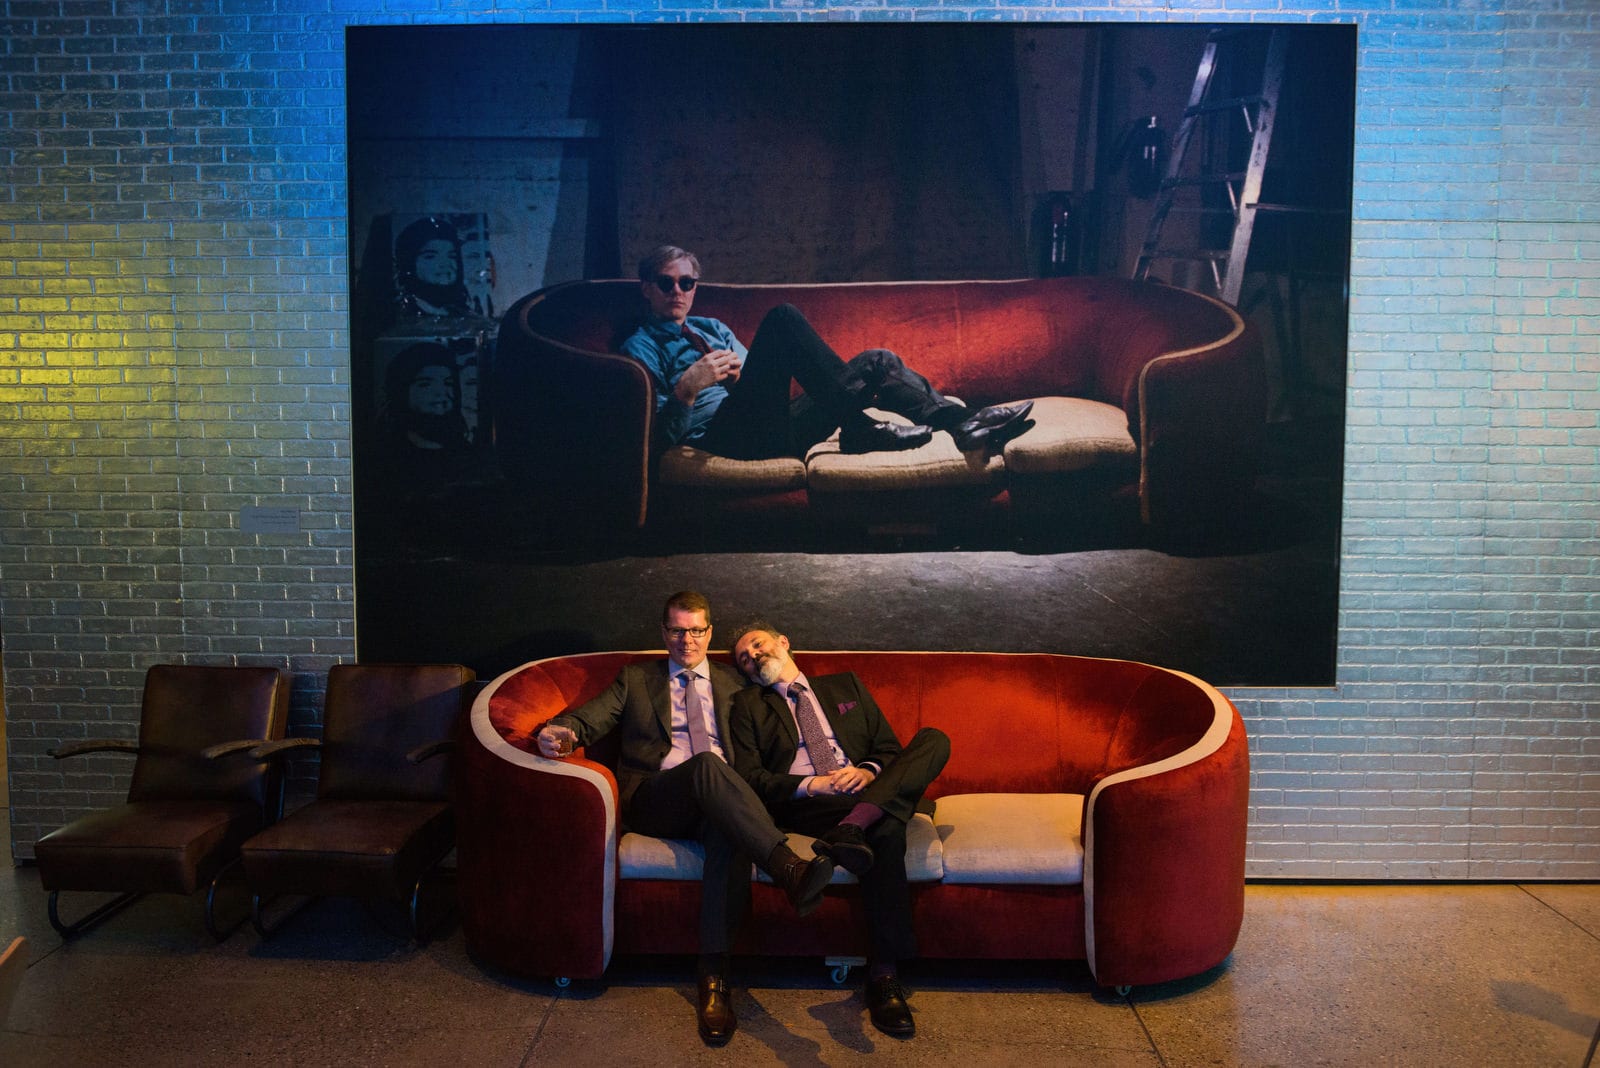 Two grooms recline on a couch after their wedding at the Andy Warhol museum. There is a portrait of Andy Warhol above them sitting on the exact same sofa.